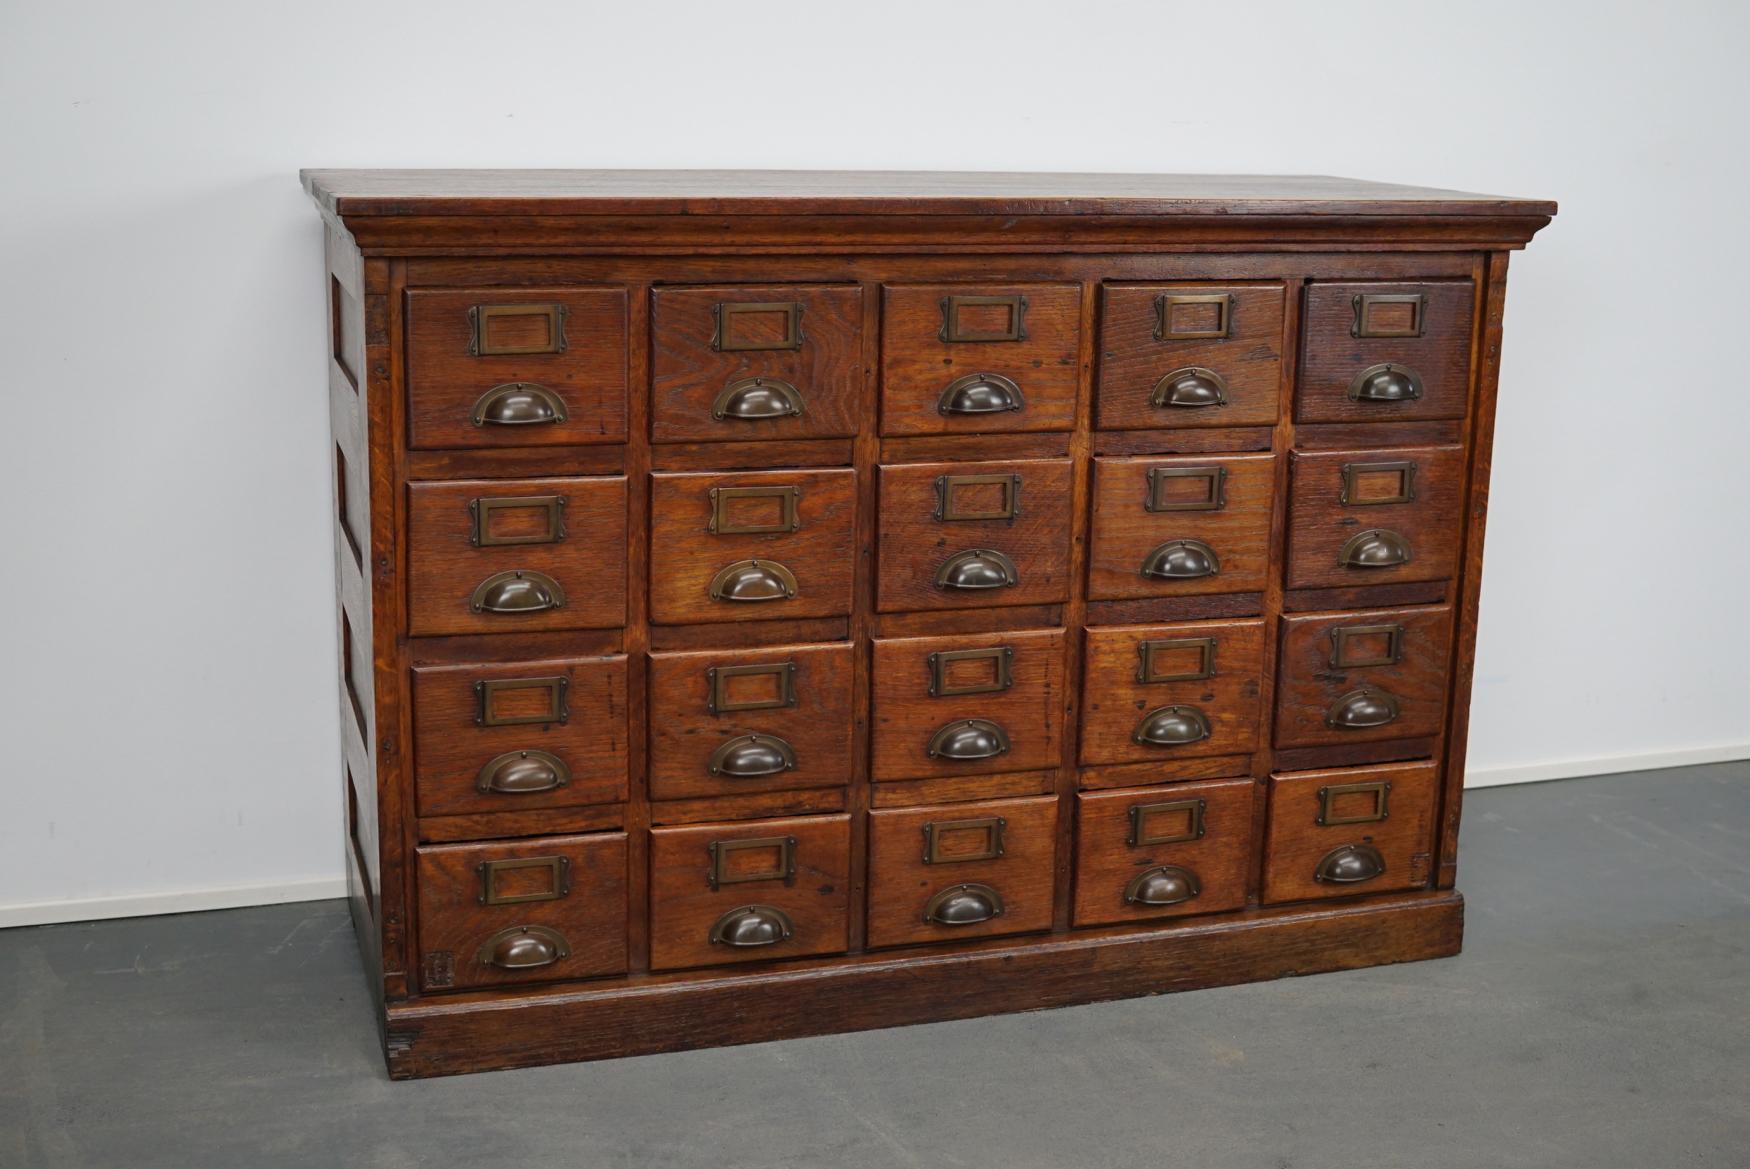 This apothecary / filing cabinet was produced during the 1930s in France. This piece features 20 drawers. The interior dimensions of the drawers are: D x W x H 35 x 16 x 11 cm.